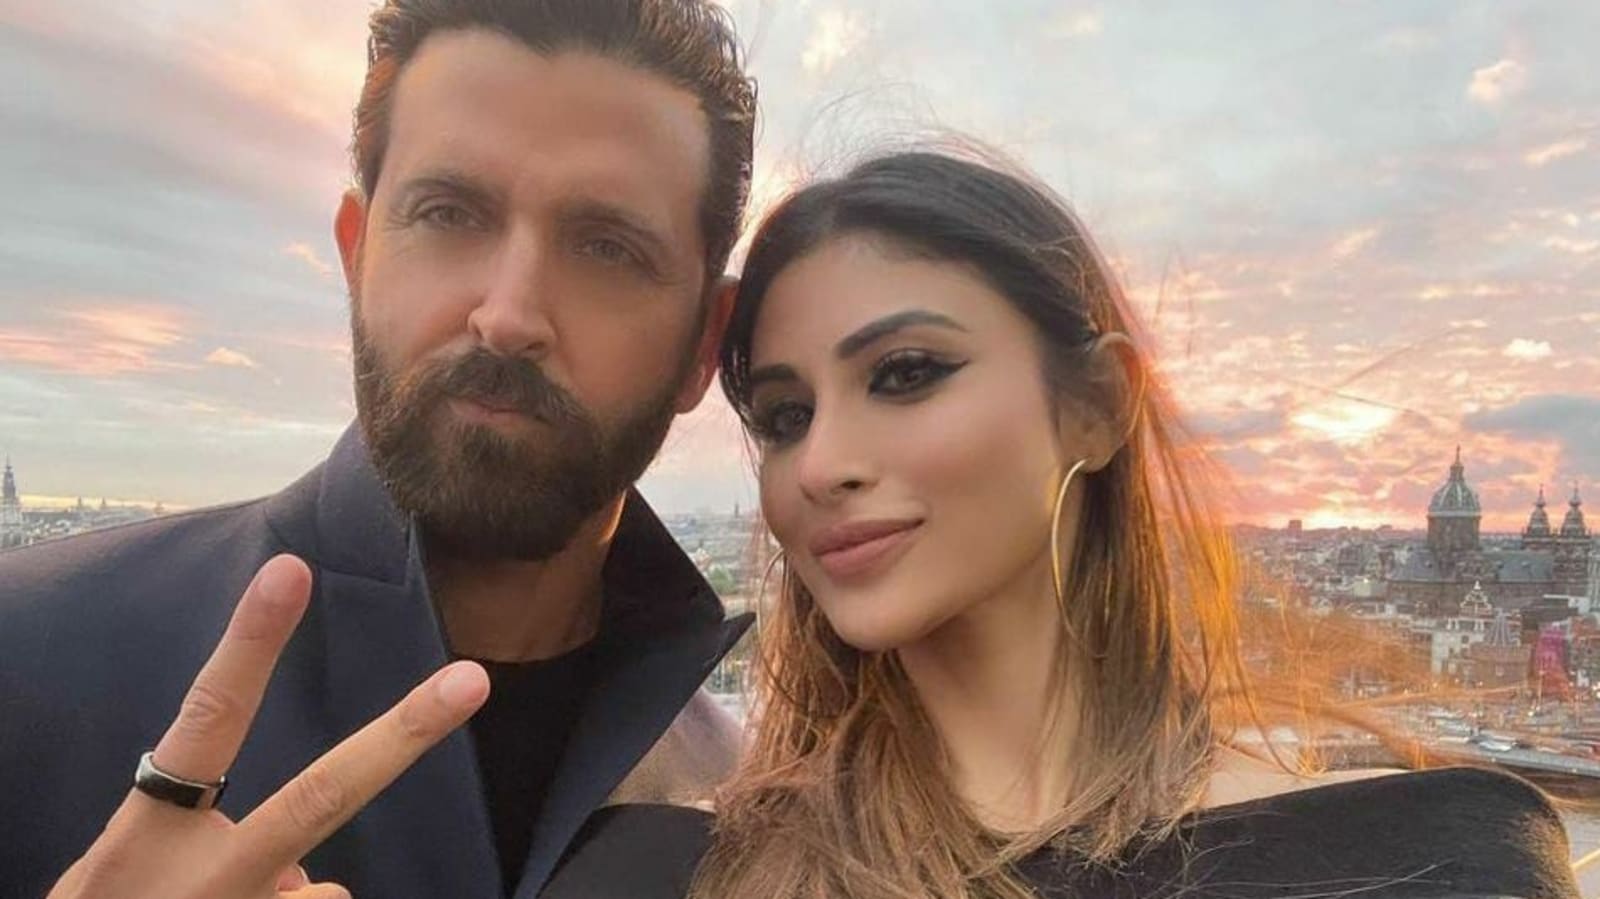 Mouni Roy shares selfie with ‘wonderful human’ Hrithik Roshan from ad shoot, fans want them cast together